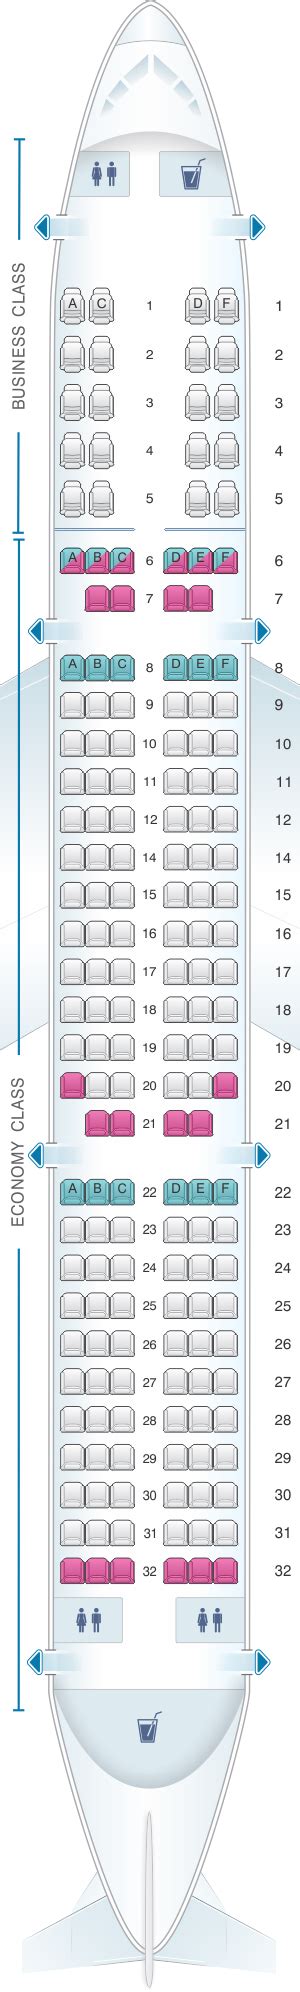 Seat map Airbus A320neo “Air India”. Best seats in the plane. COMING SOON!!! Home; Cheap airline tickets; Airlines; Best seats; Tips and info; Reviews; ... Latest airline news. How travels will look like in 50 years? …. 